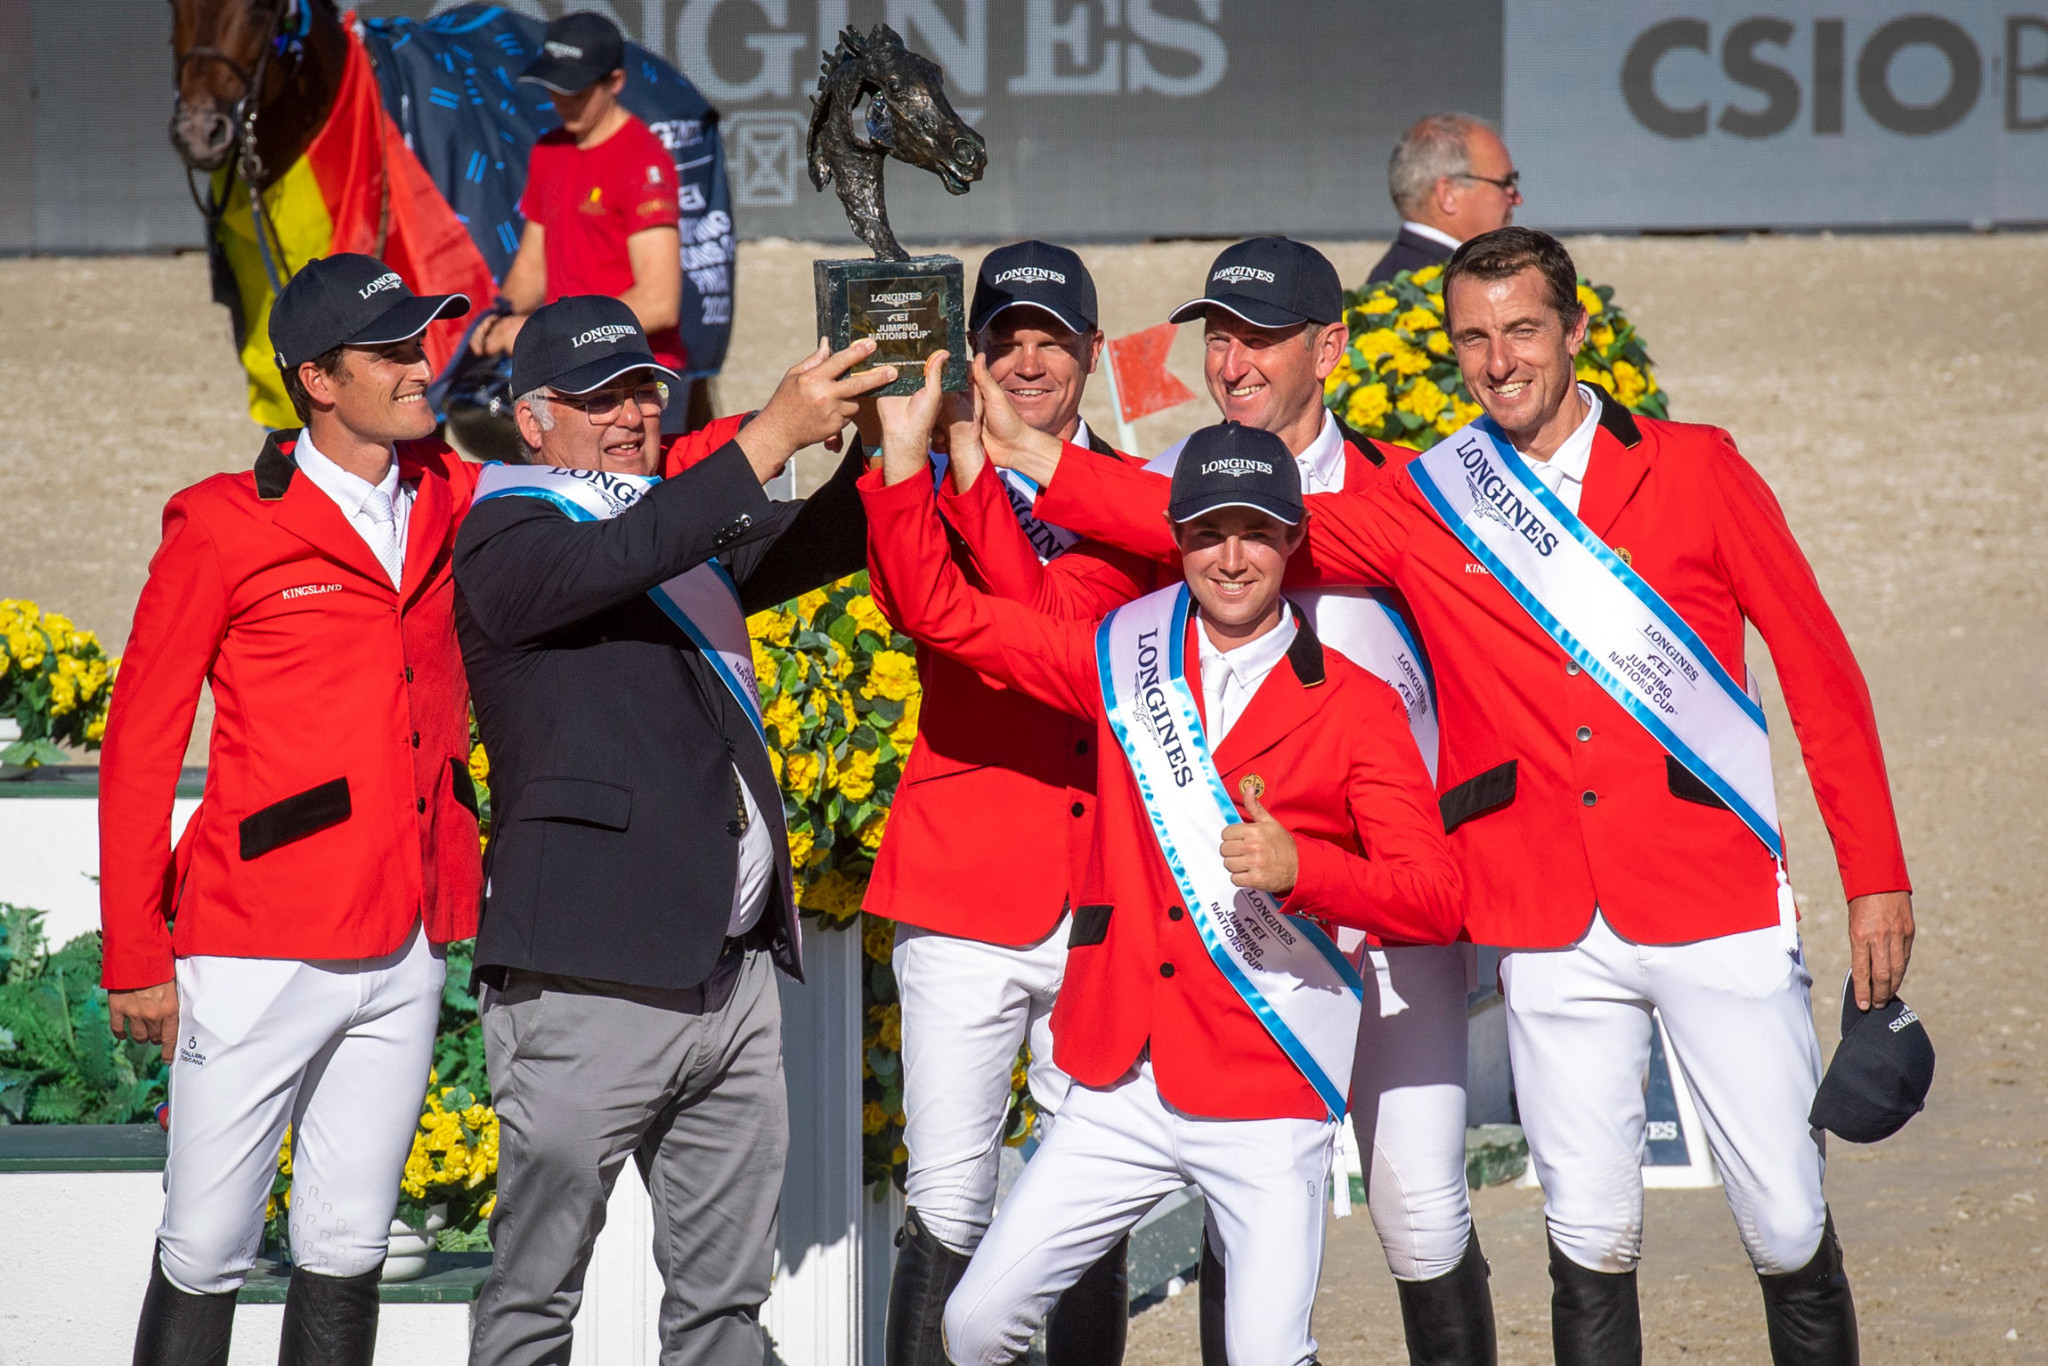 Belgium sealed their spot at the Paris 2024 Olympics after winning the FEI Jumping Nations Cup ©FEI